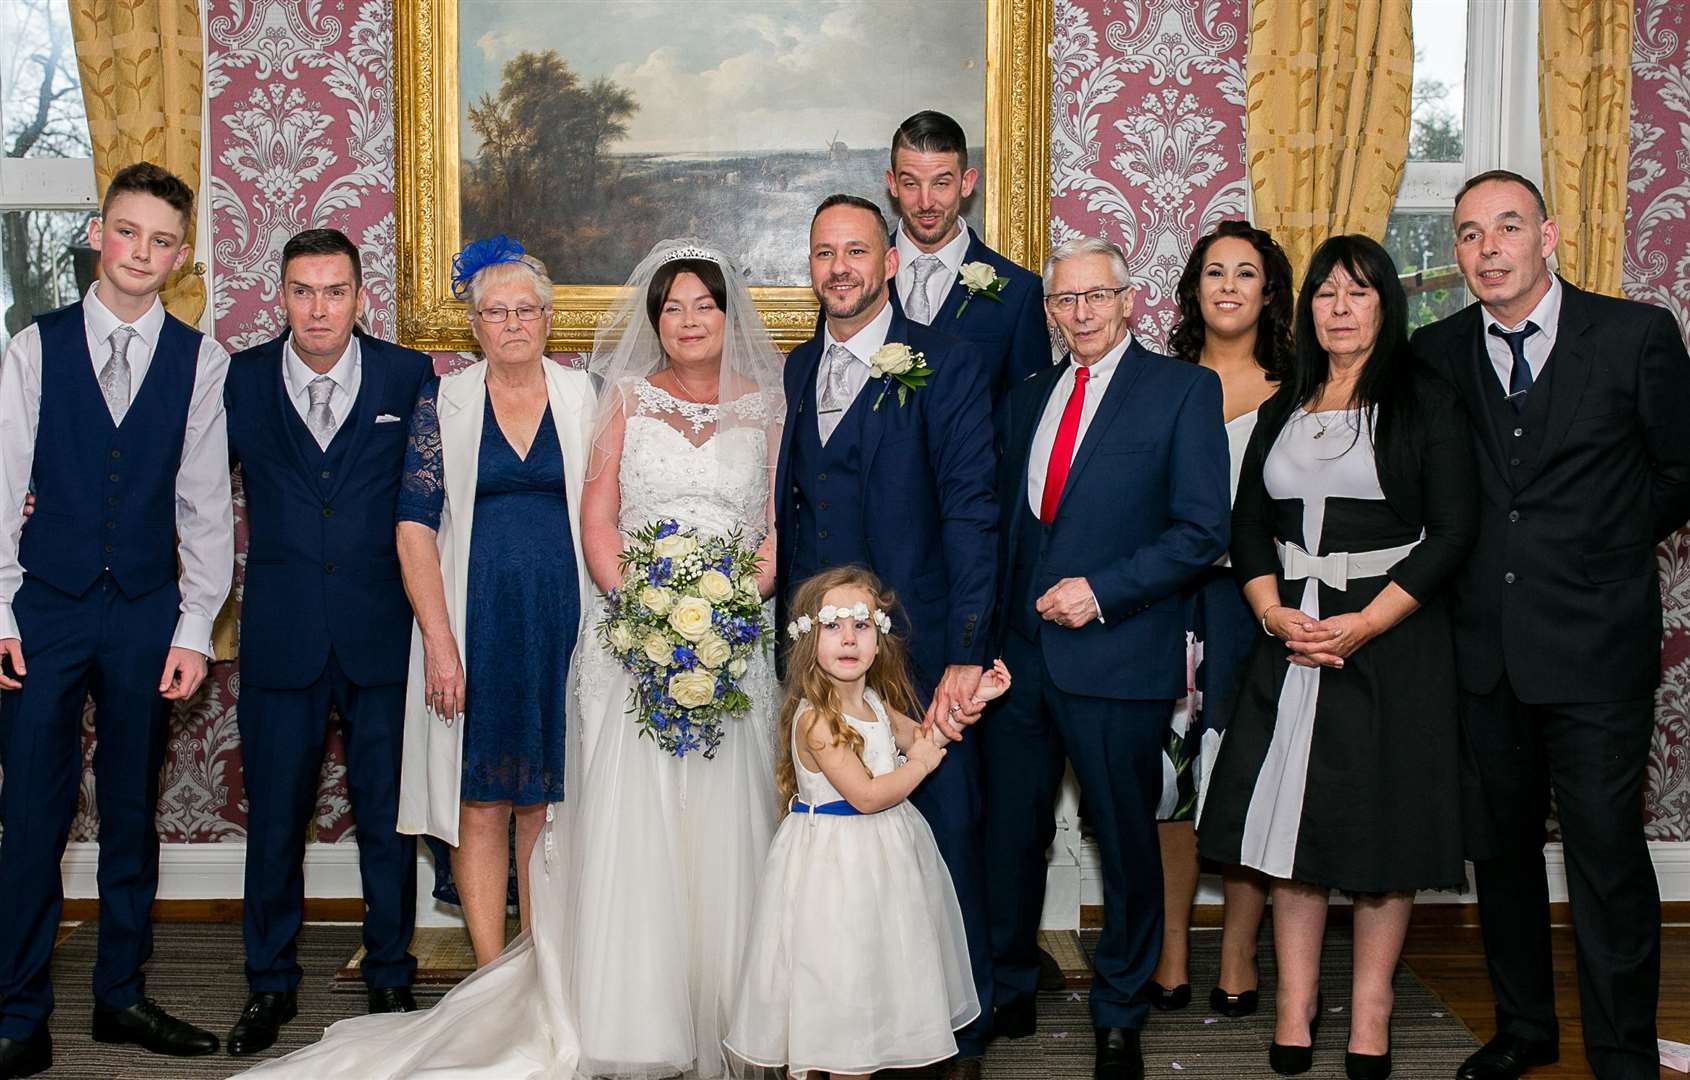 Asher and Trevor Seager tied the knot at Larkfield Priory Hotel